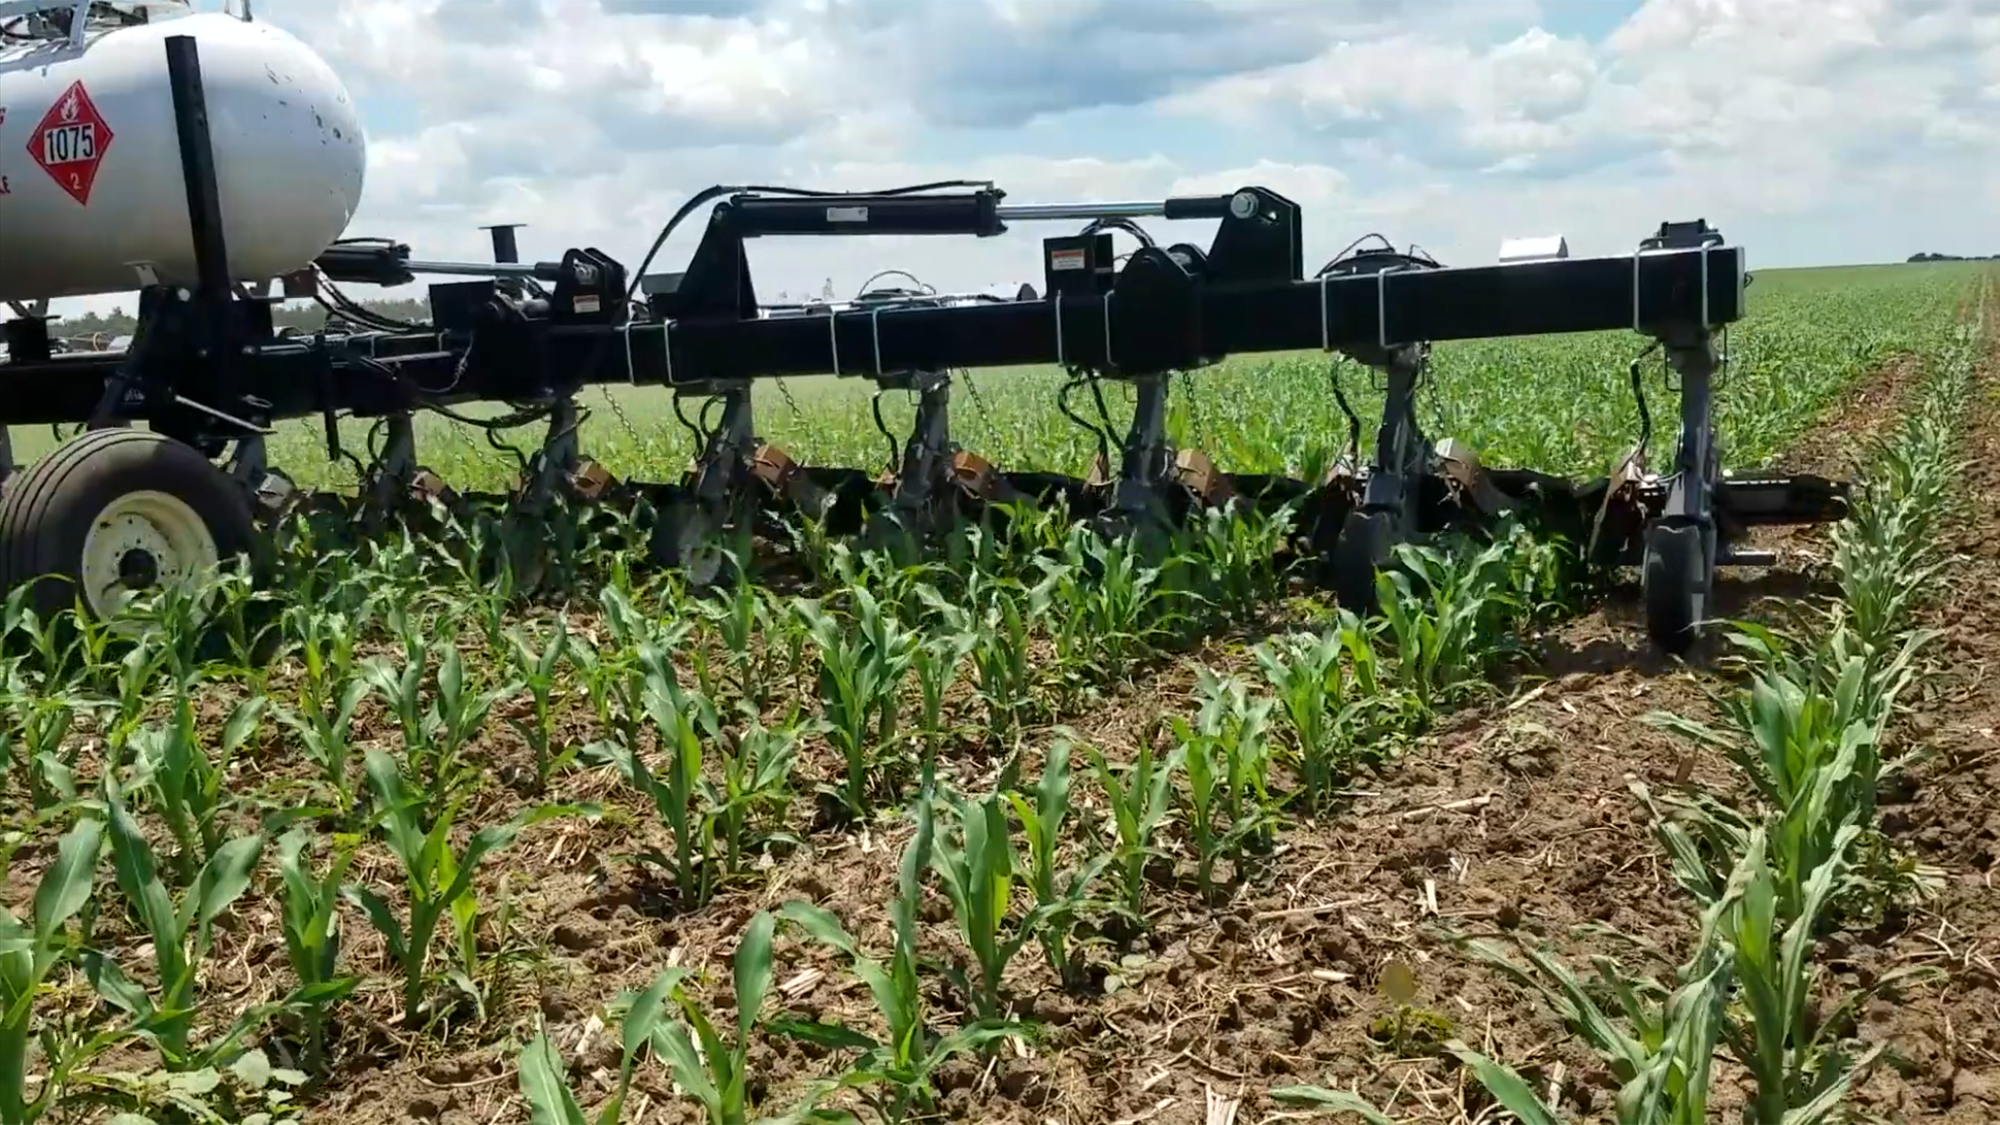 Agricultural Flaming Innovations developed equipment that uses heat for certified organic weed control. When mounted to a tractor, it directs propane-fueled flames at weeds, which wilt and die — leaving crops unaffected.